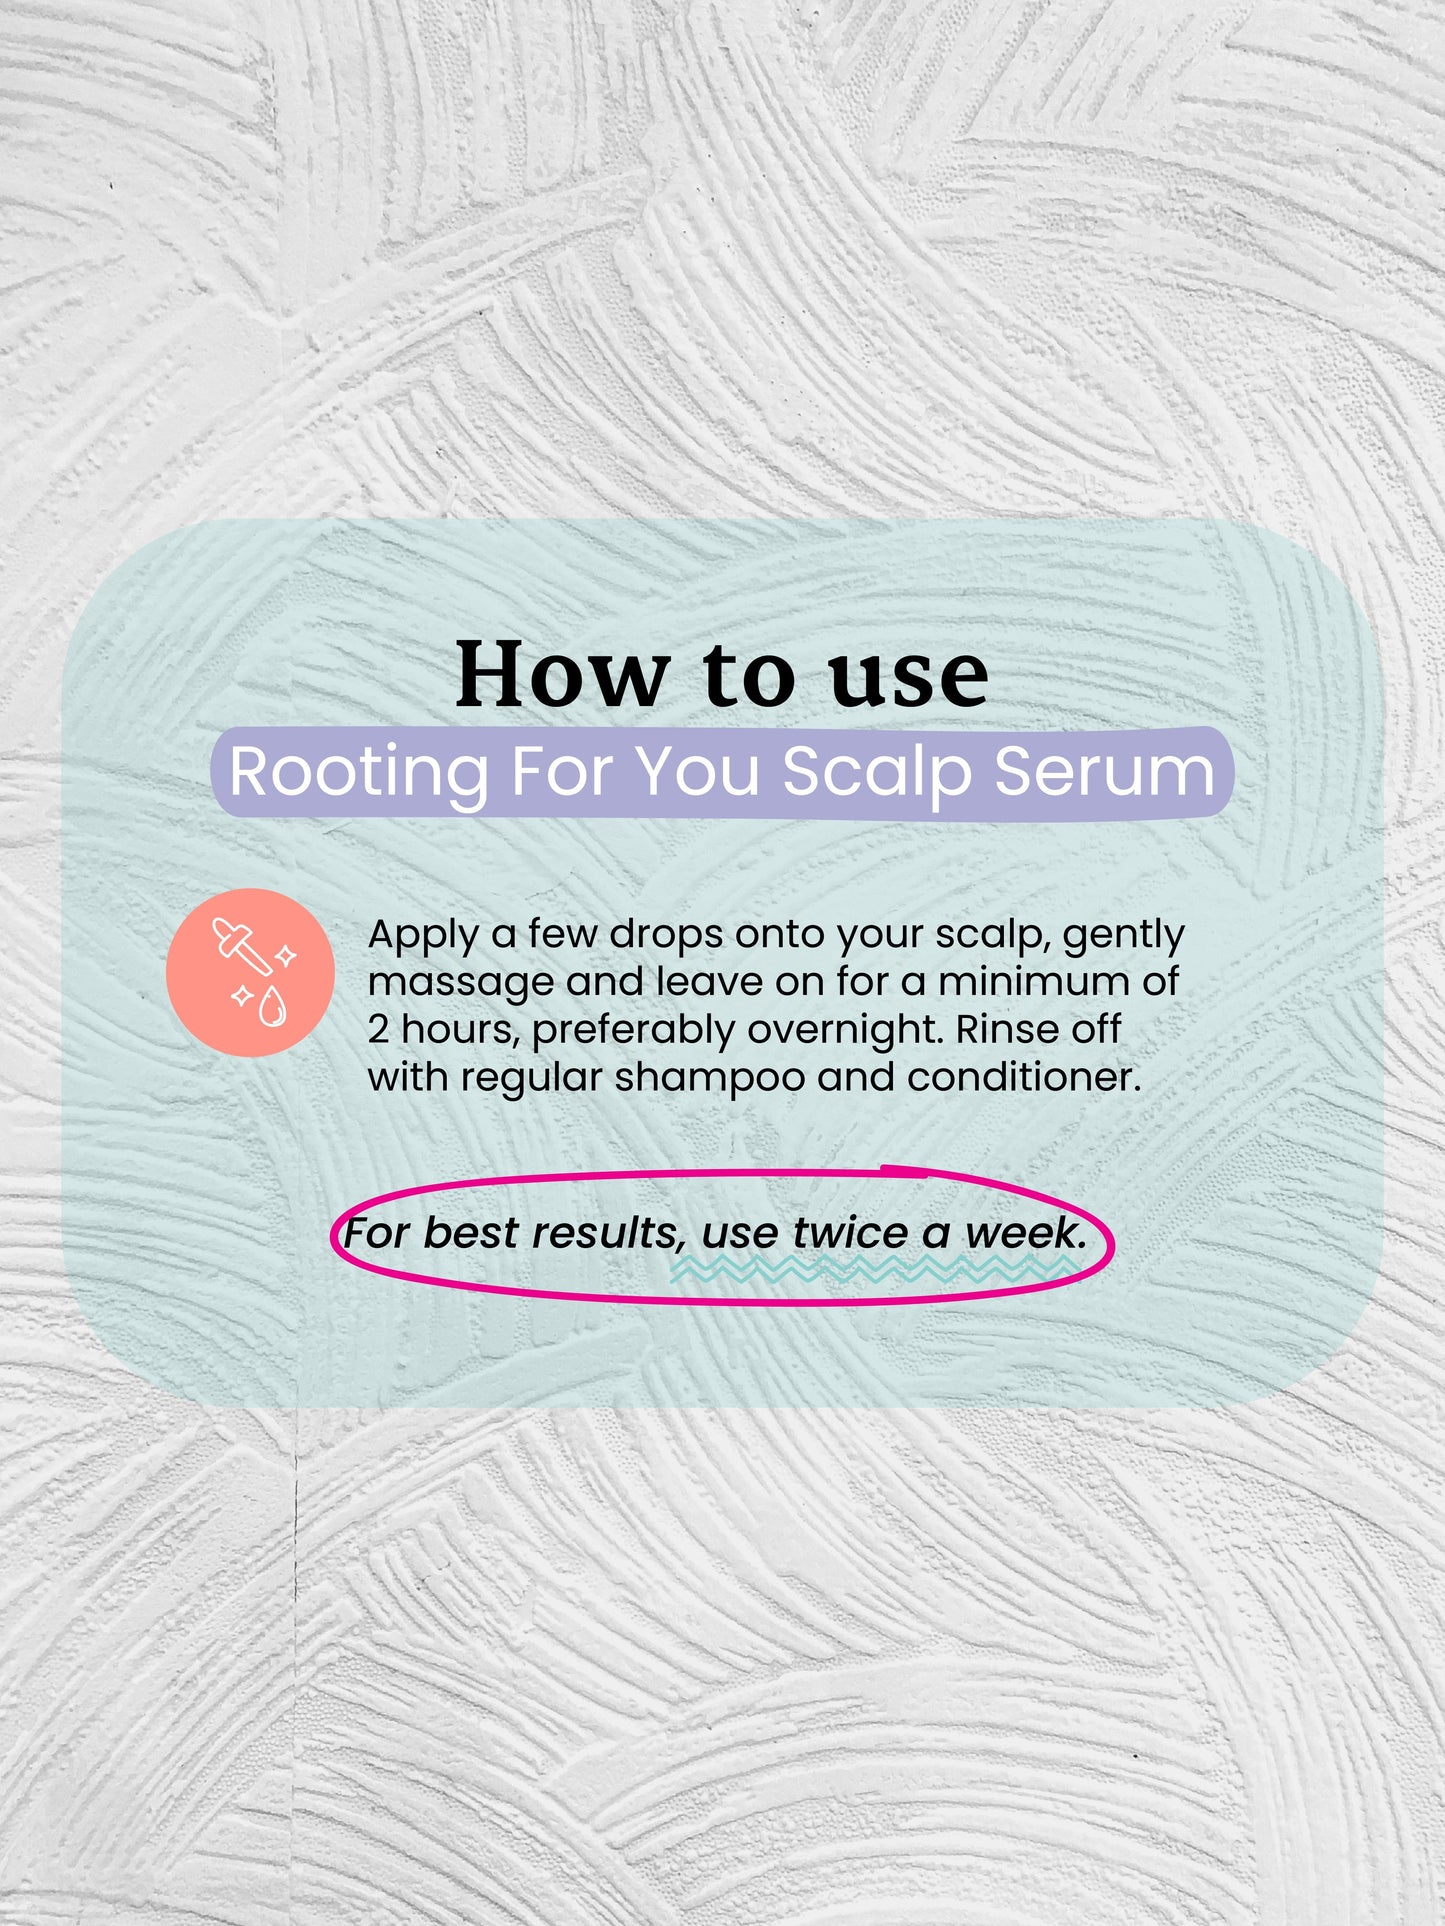 Rooting For You Scalp Serum